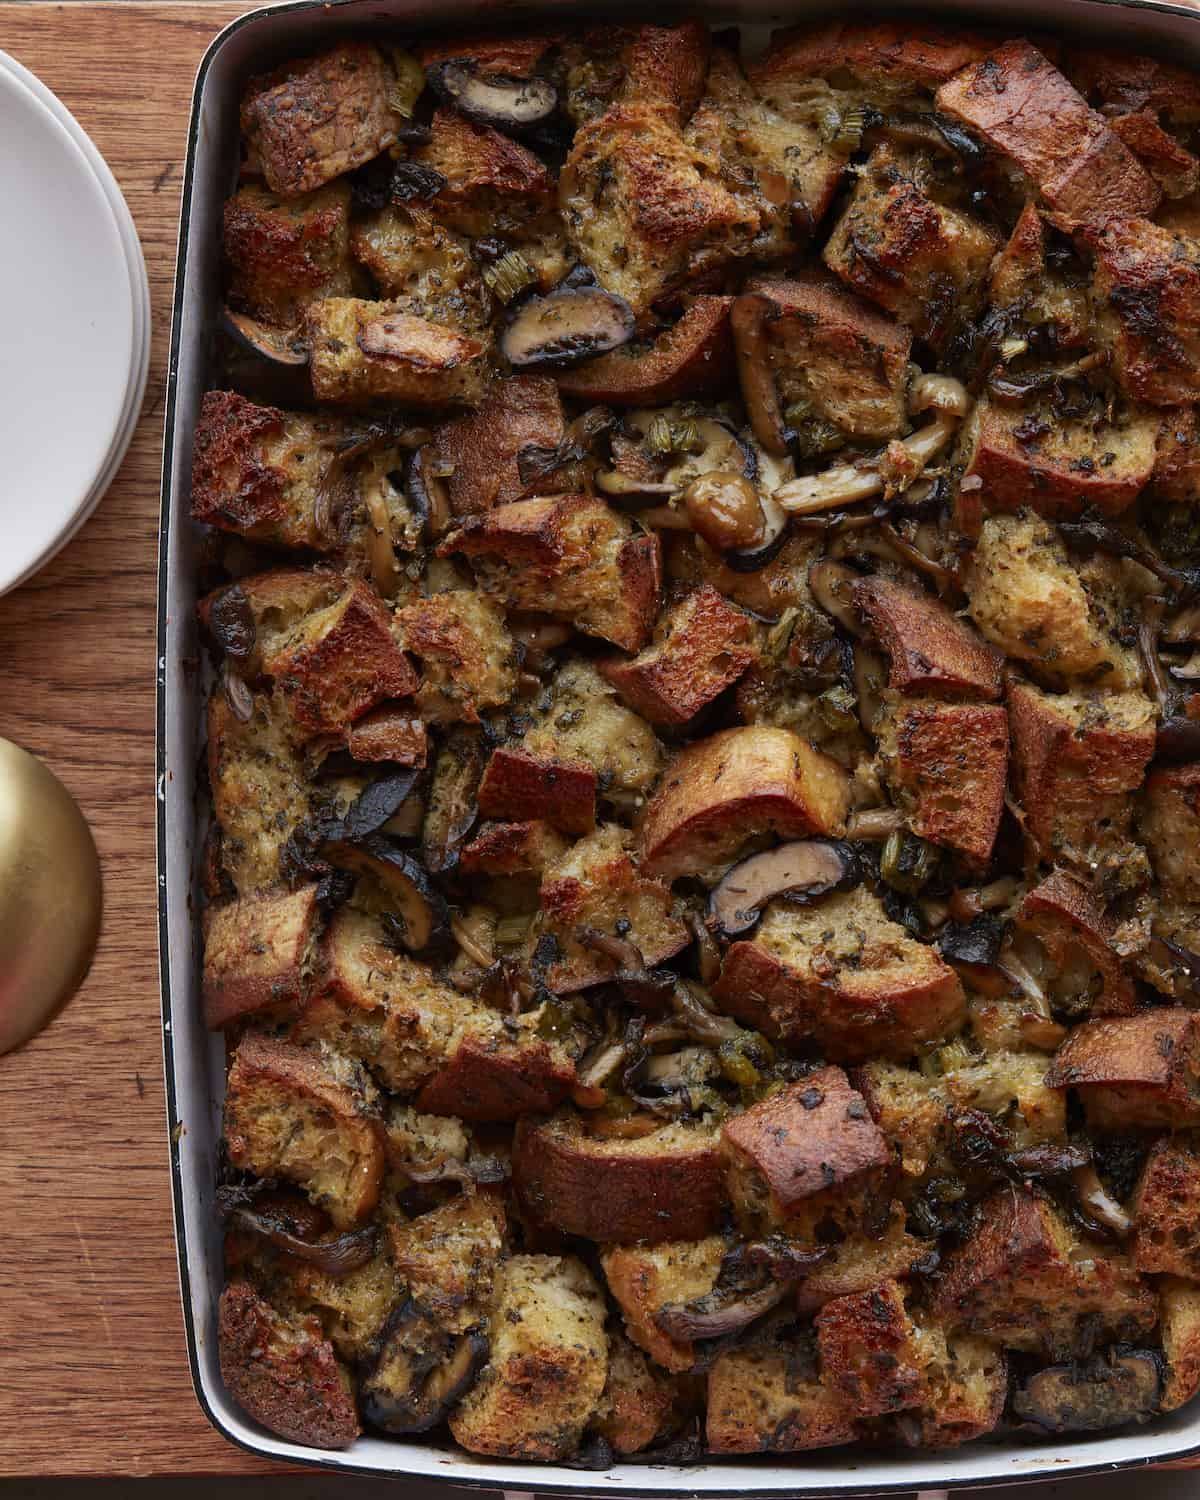 A close-up shot of a baking dish with mushroom stuffing in it.